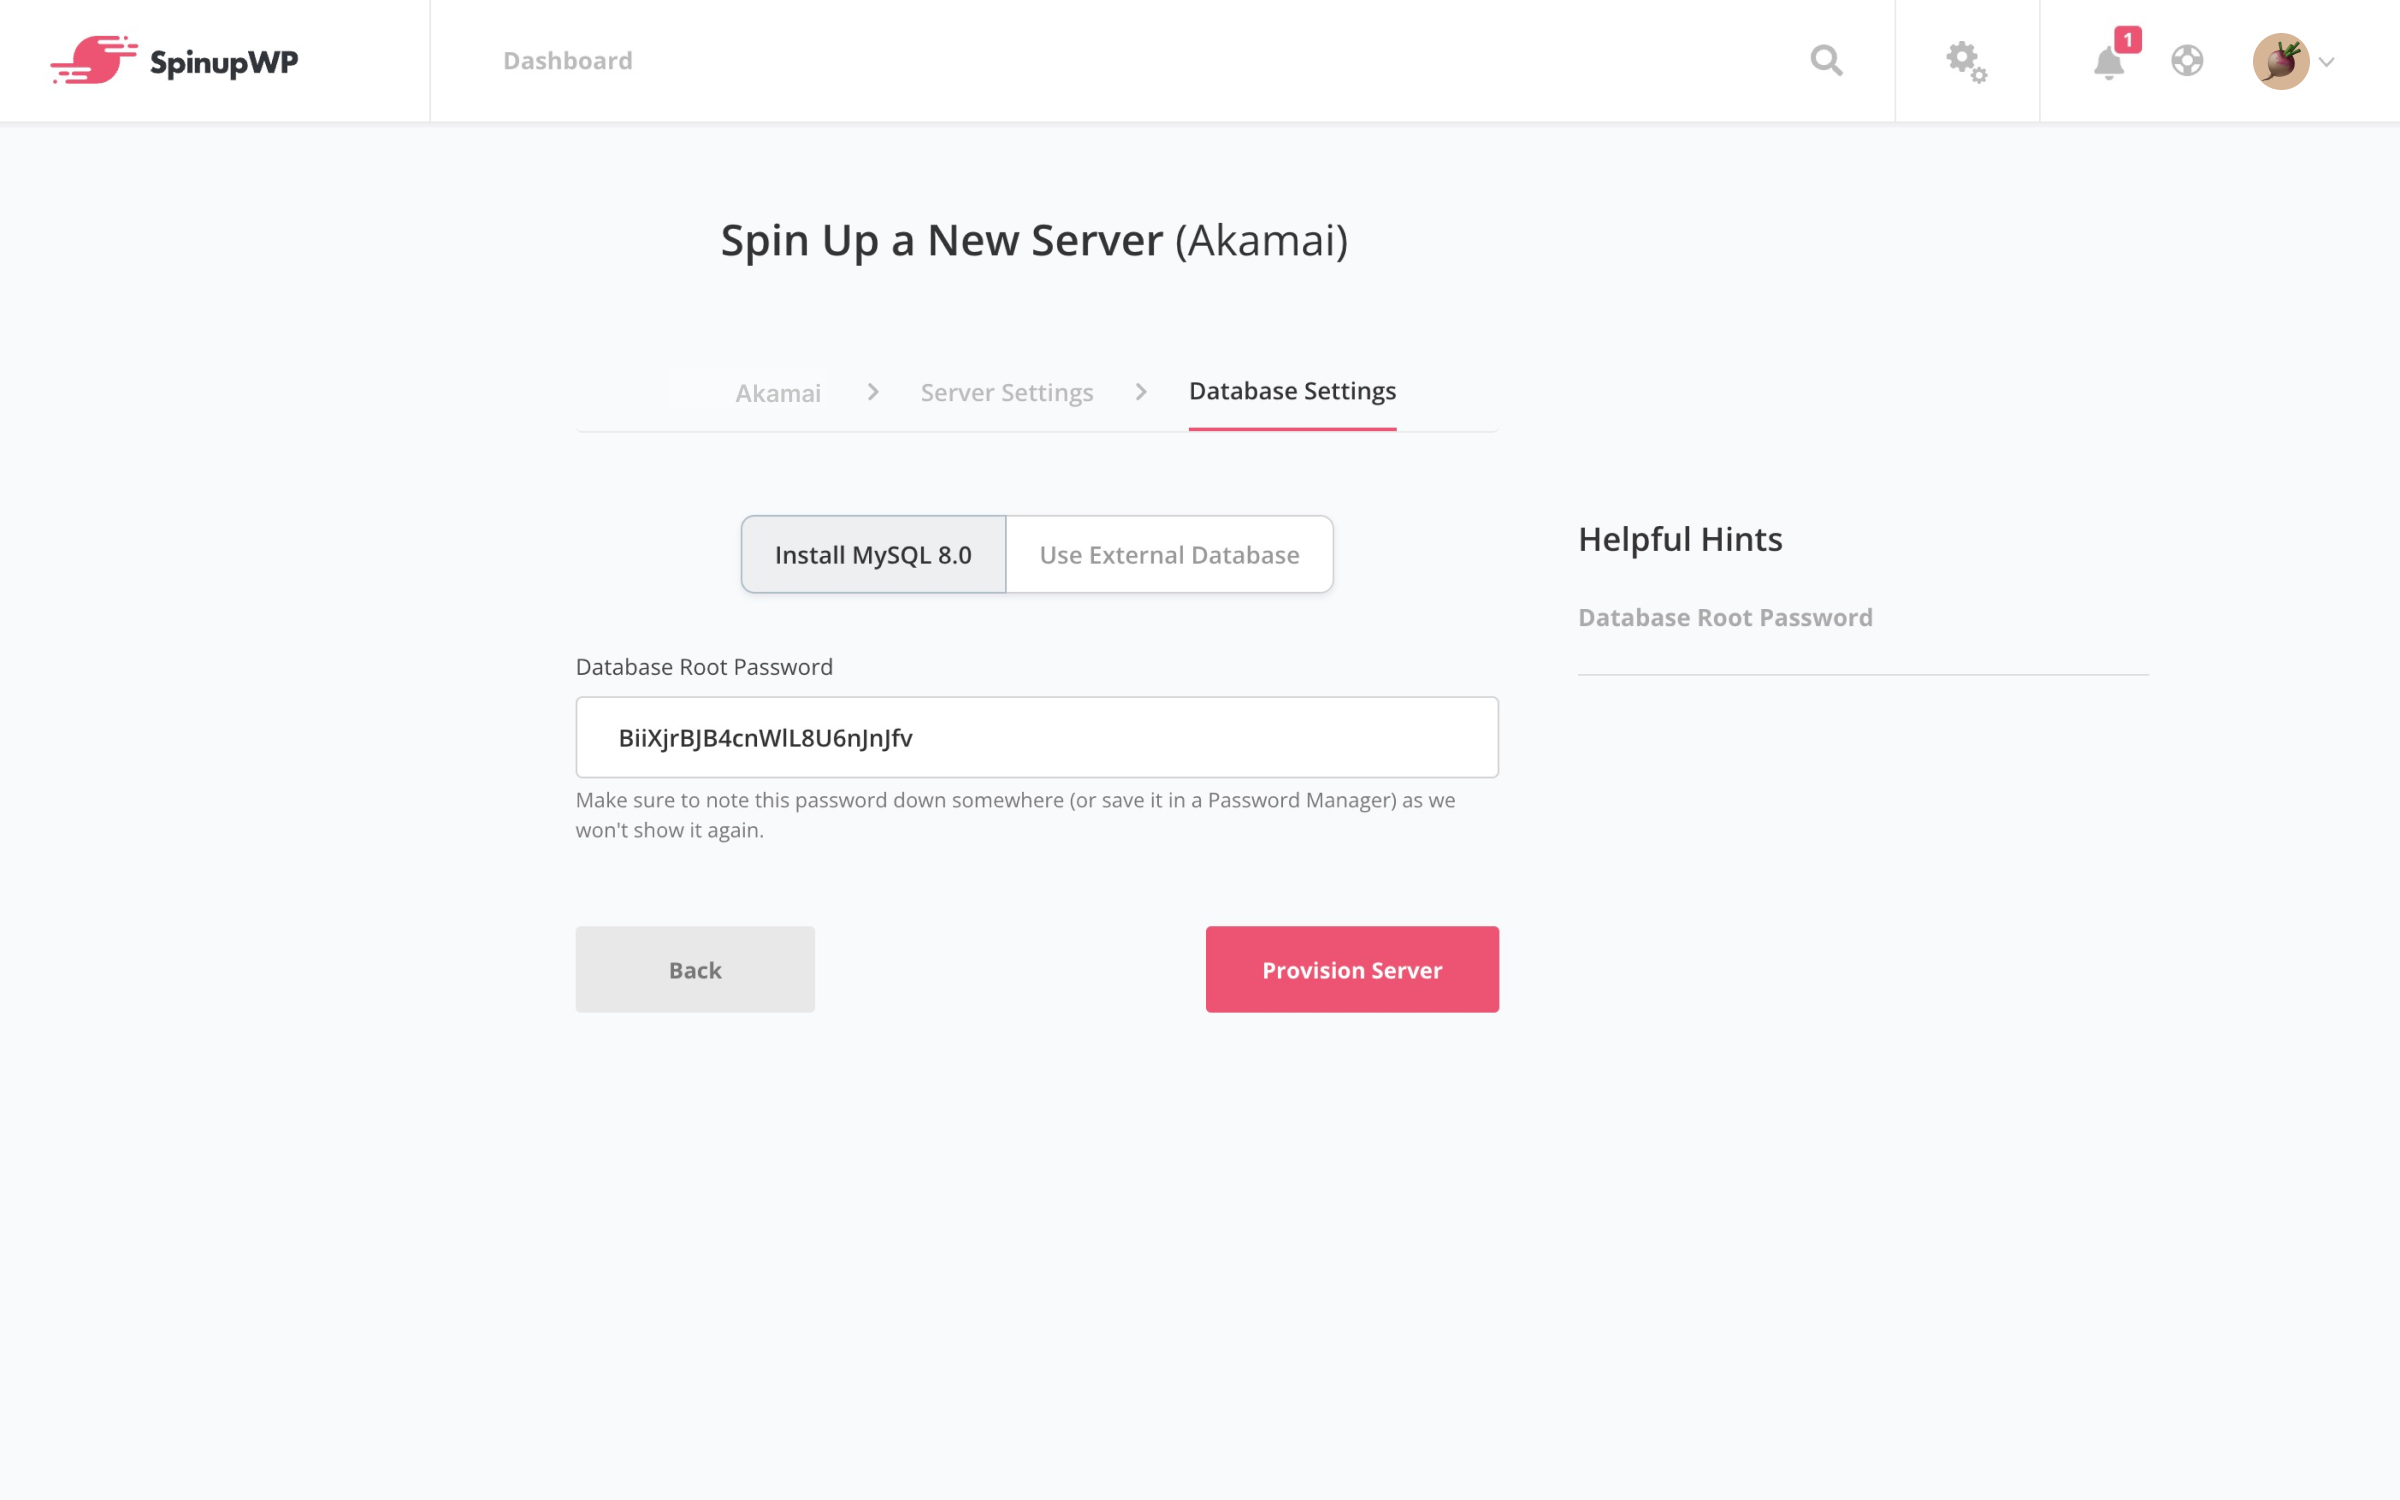 Spinning up a new Akamai server with SpinupWP